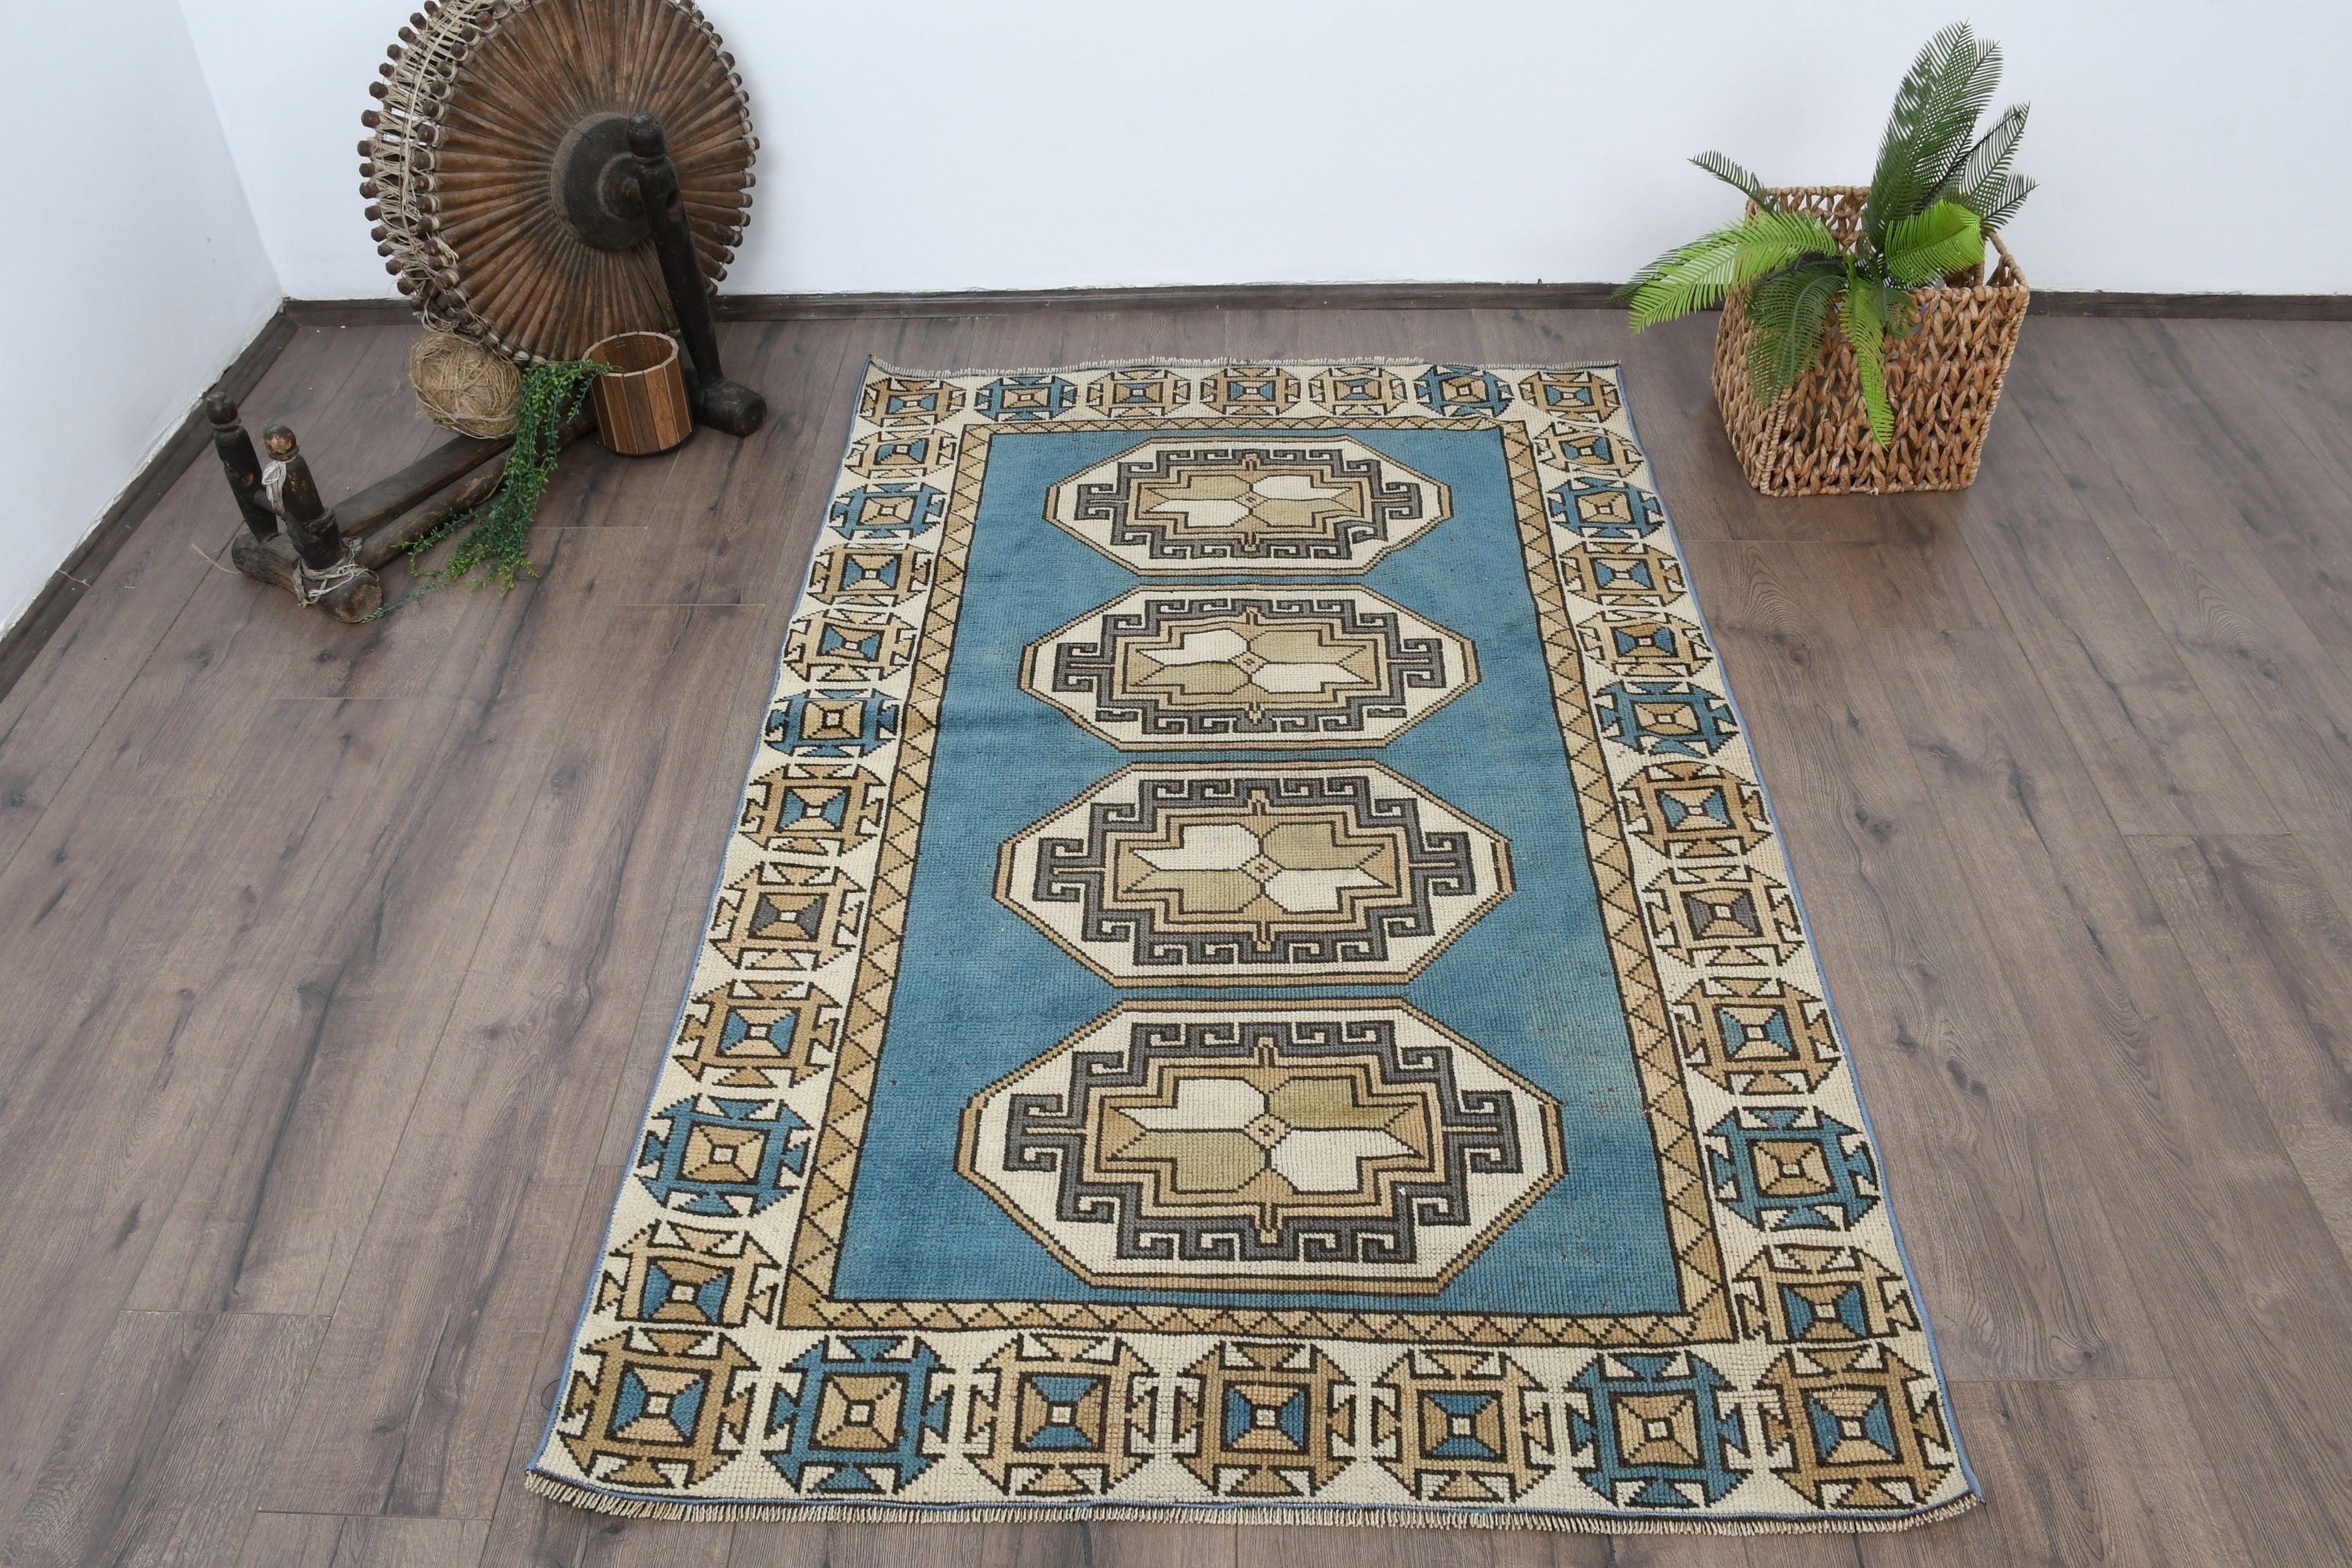 Vintage Rugs, Turkish Rugs, Retro Rug, Kitchen Rug, Rugs for Entry, Brown Bedroom Rugs, Nursery Rugs, 3.6x5.8 ft Accent Rug, Moroccan Rug